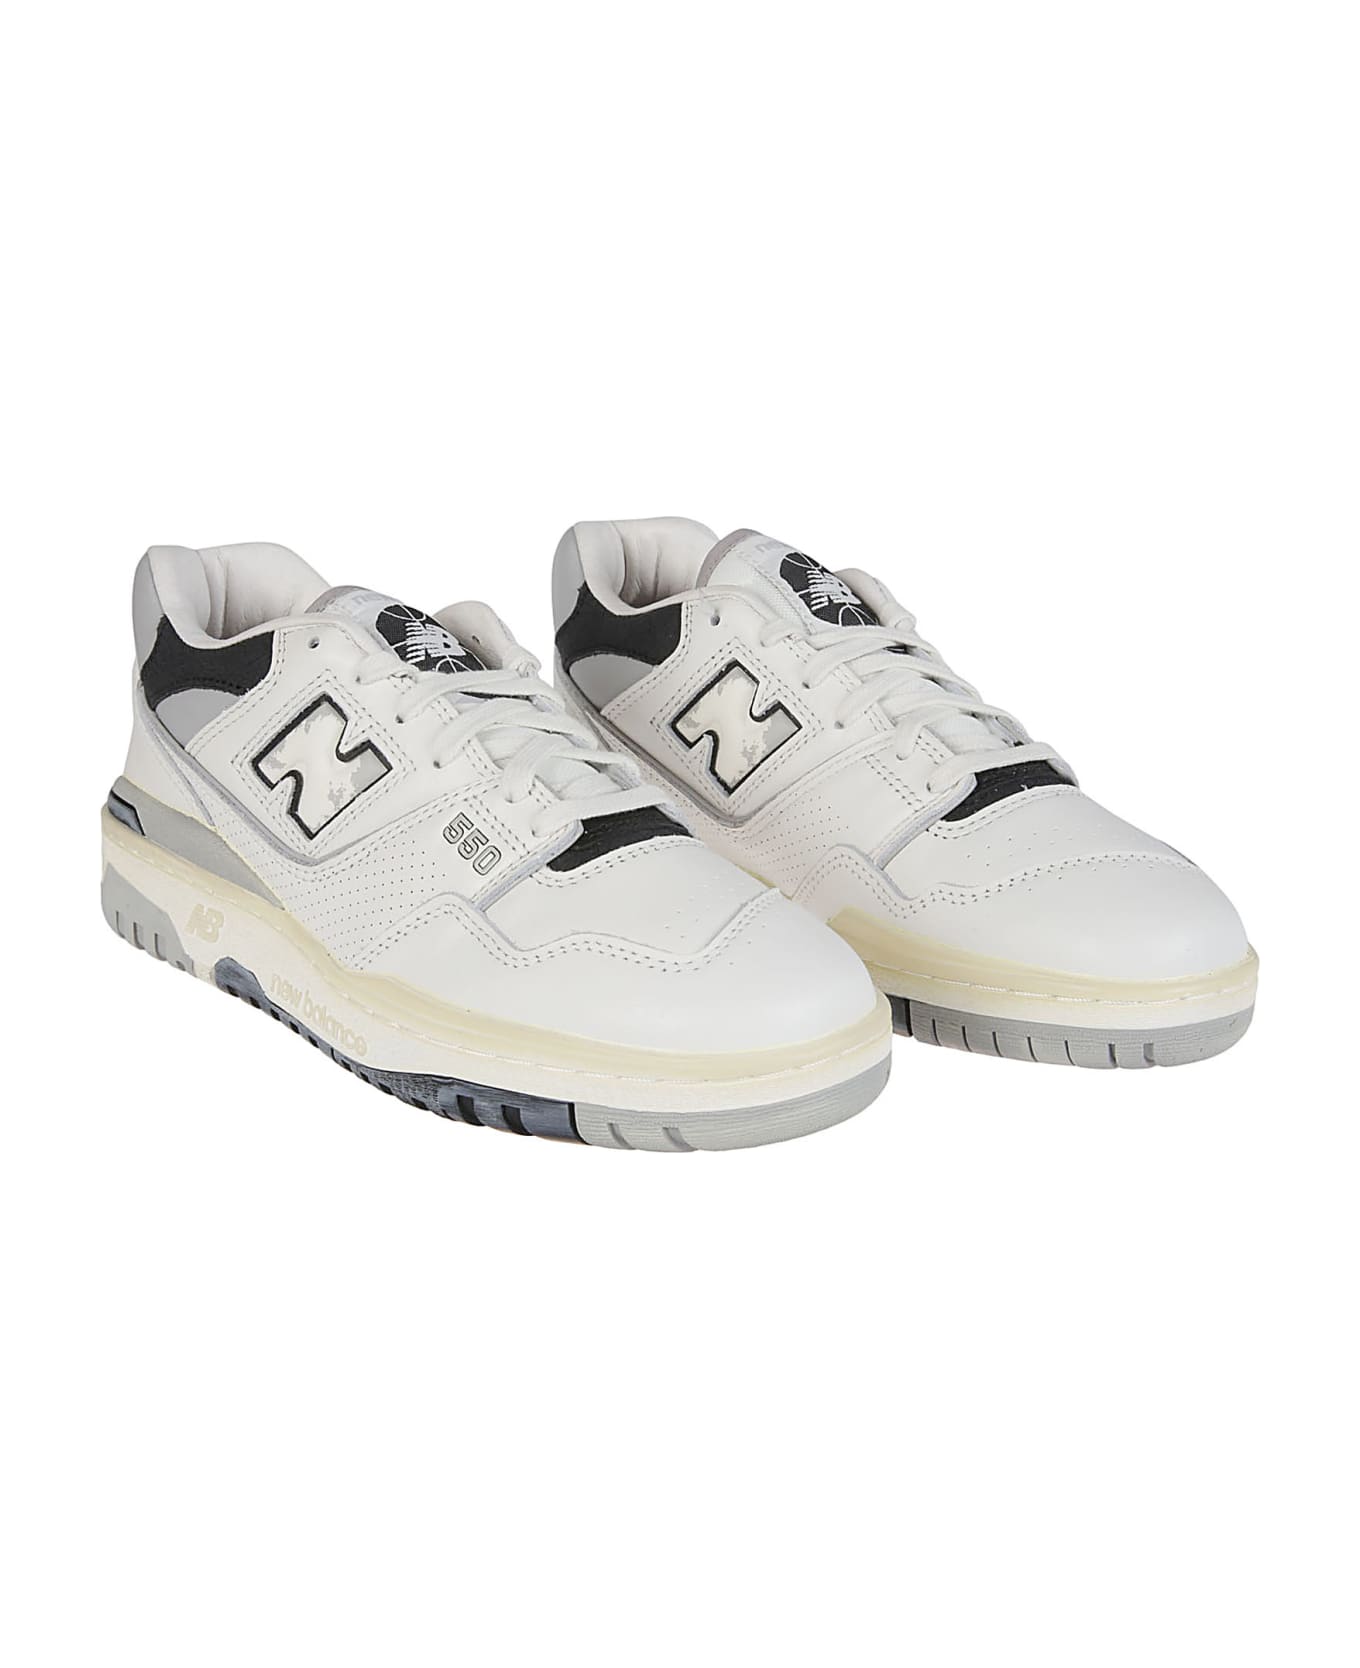 New Balance 550 Sneakers - Off White/grey スニーカー